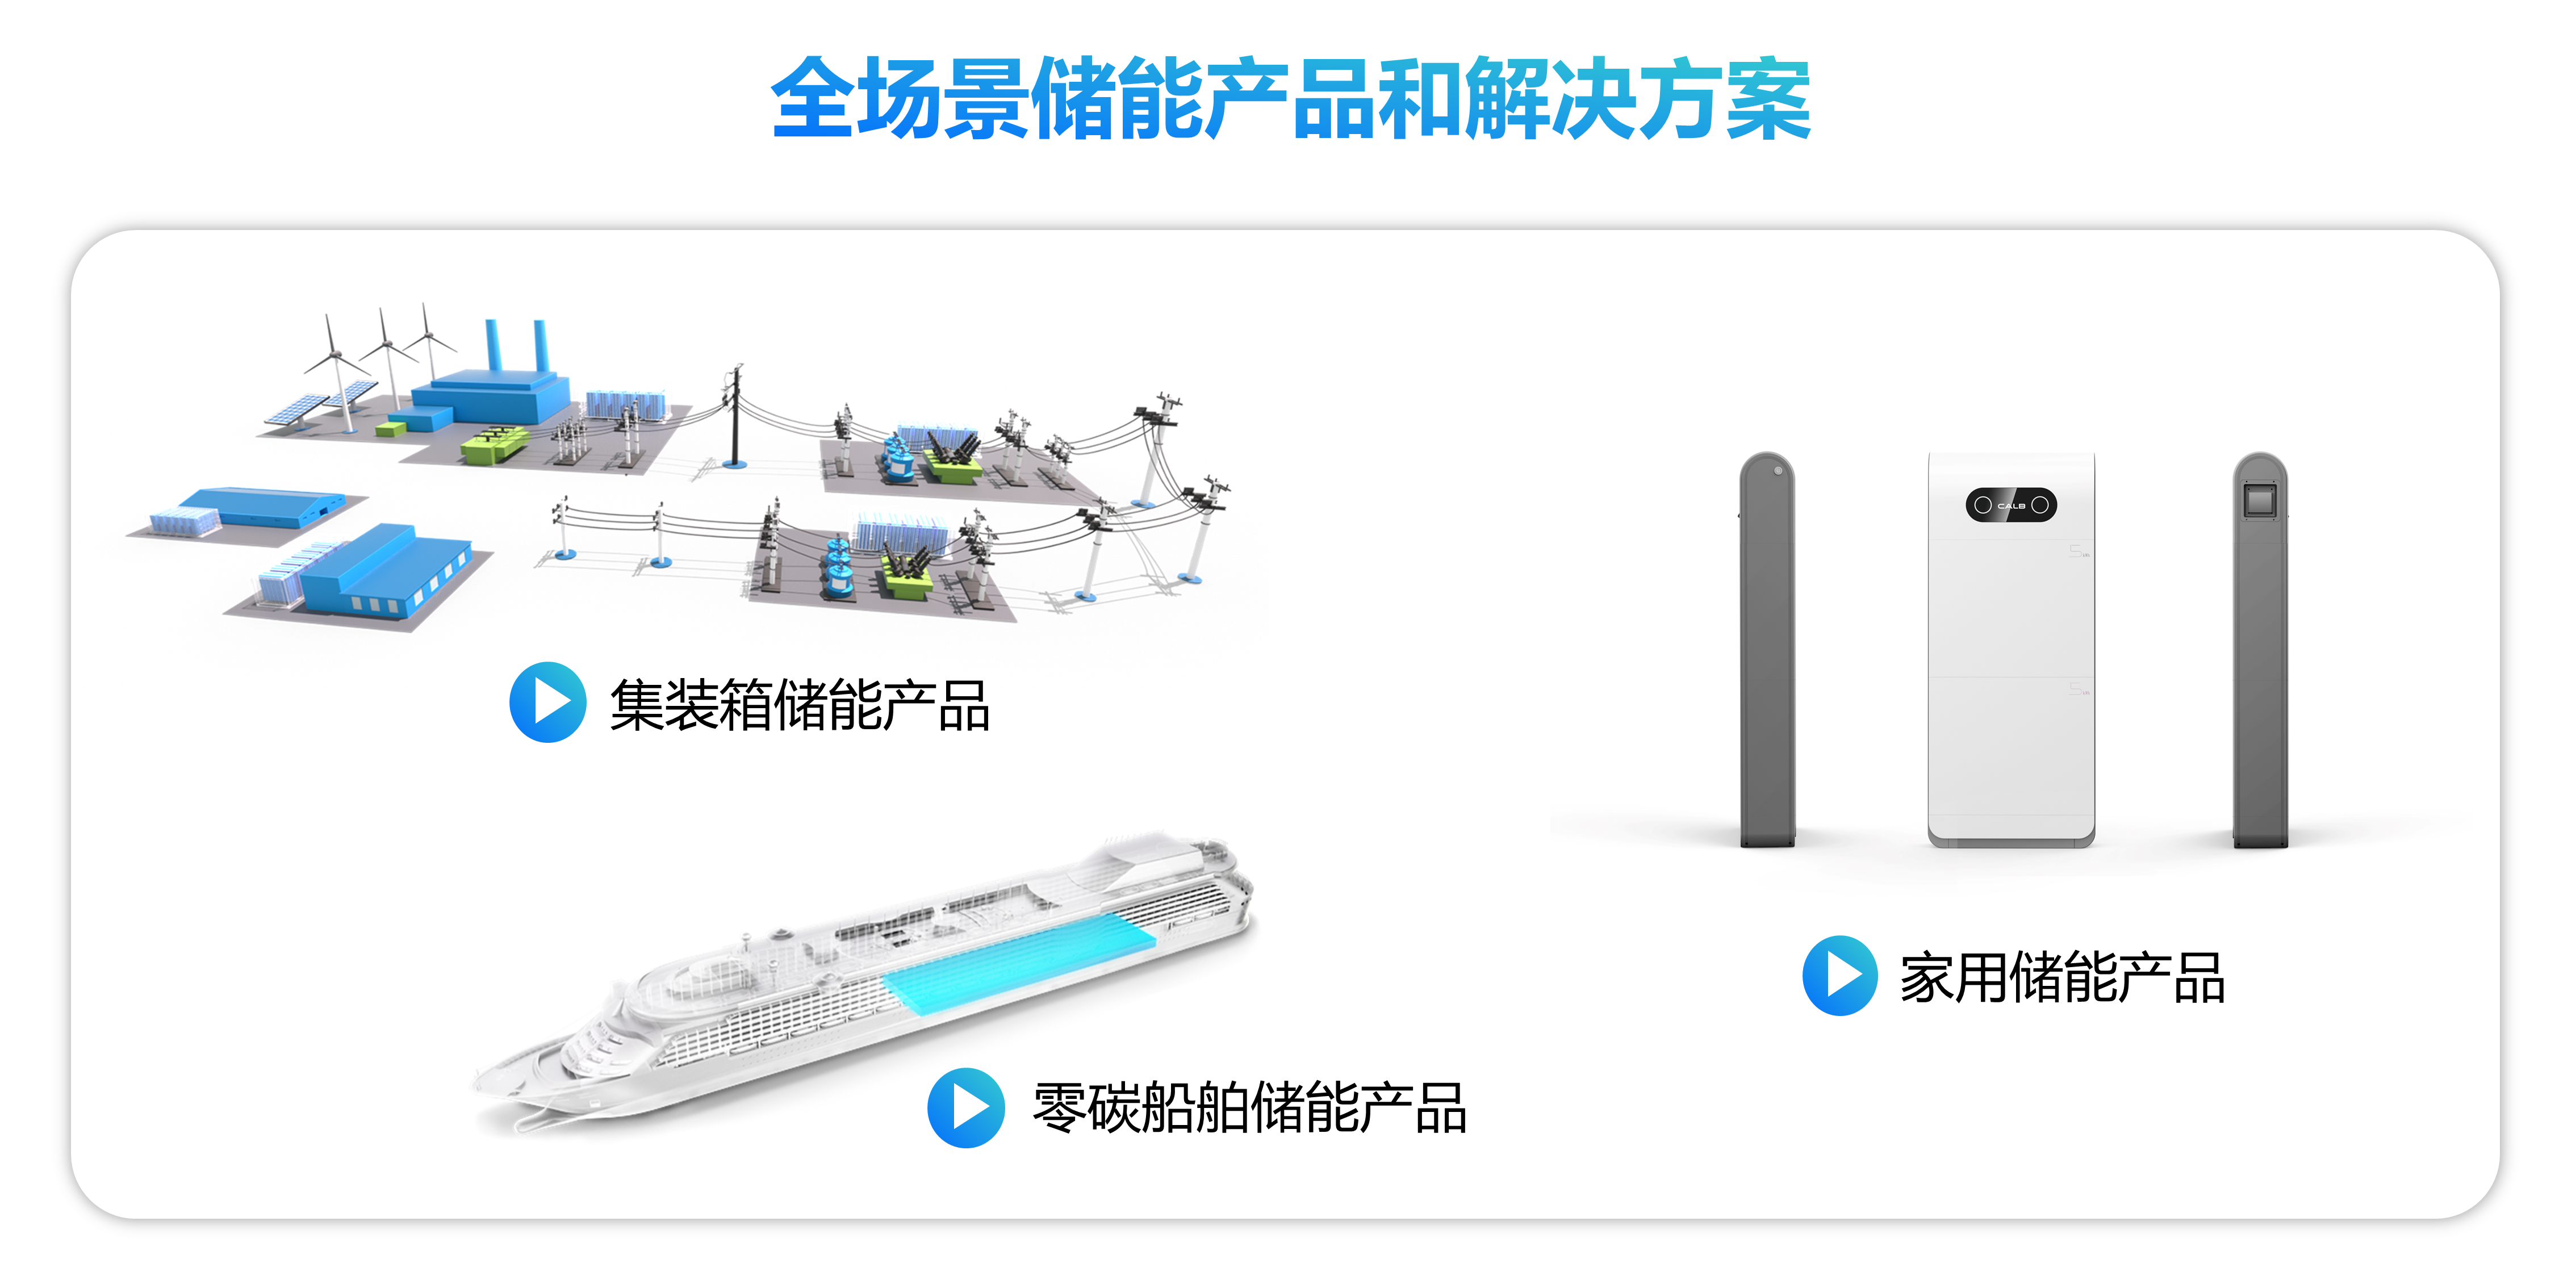 Re-acceleration︱ Successful Launch of the First Batch of Products of CALB Chengdu Phase I 